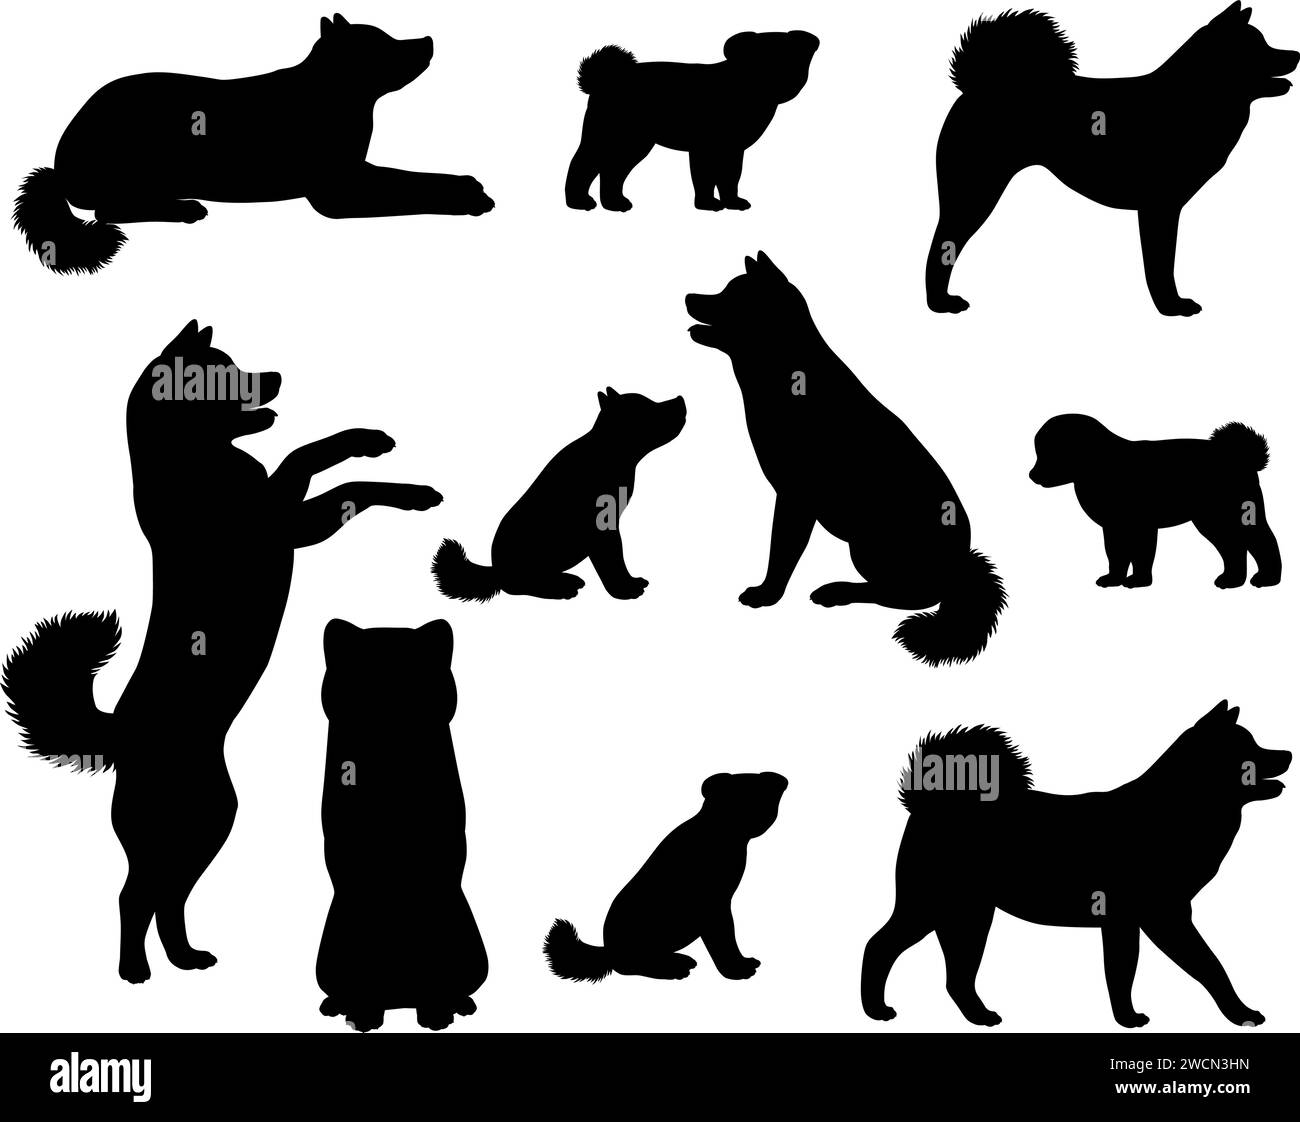 Collection of silhouettes of Japanese Akita or Akita Inu dog breed Stock Vector